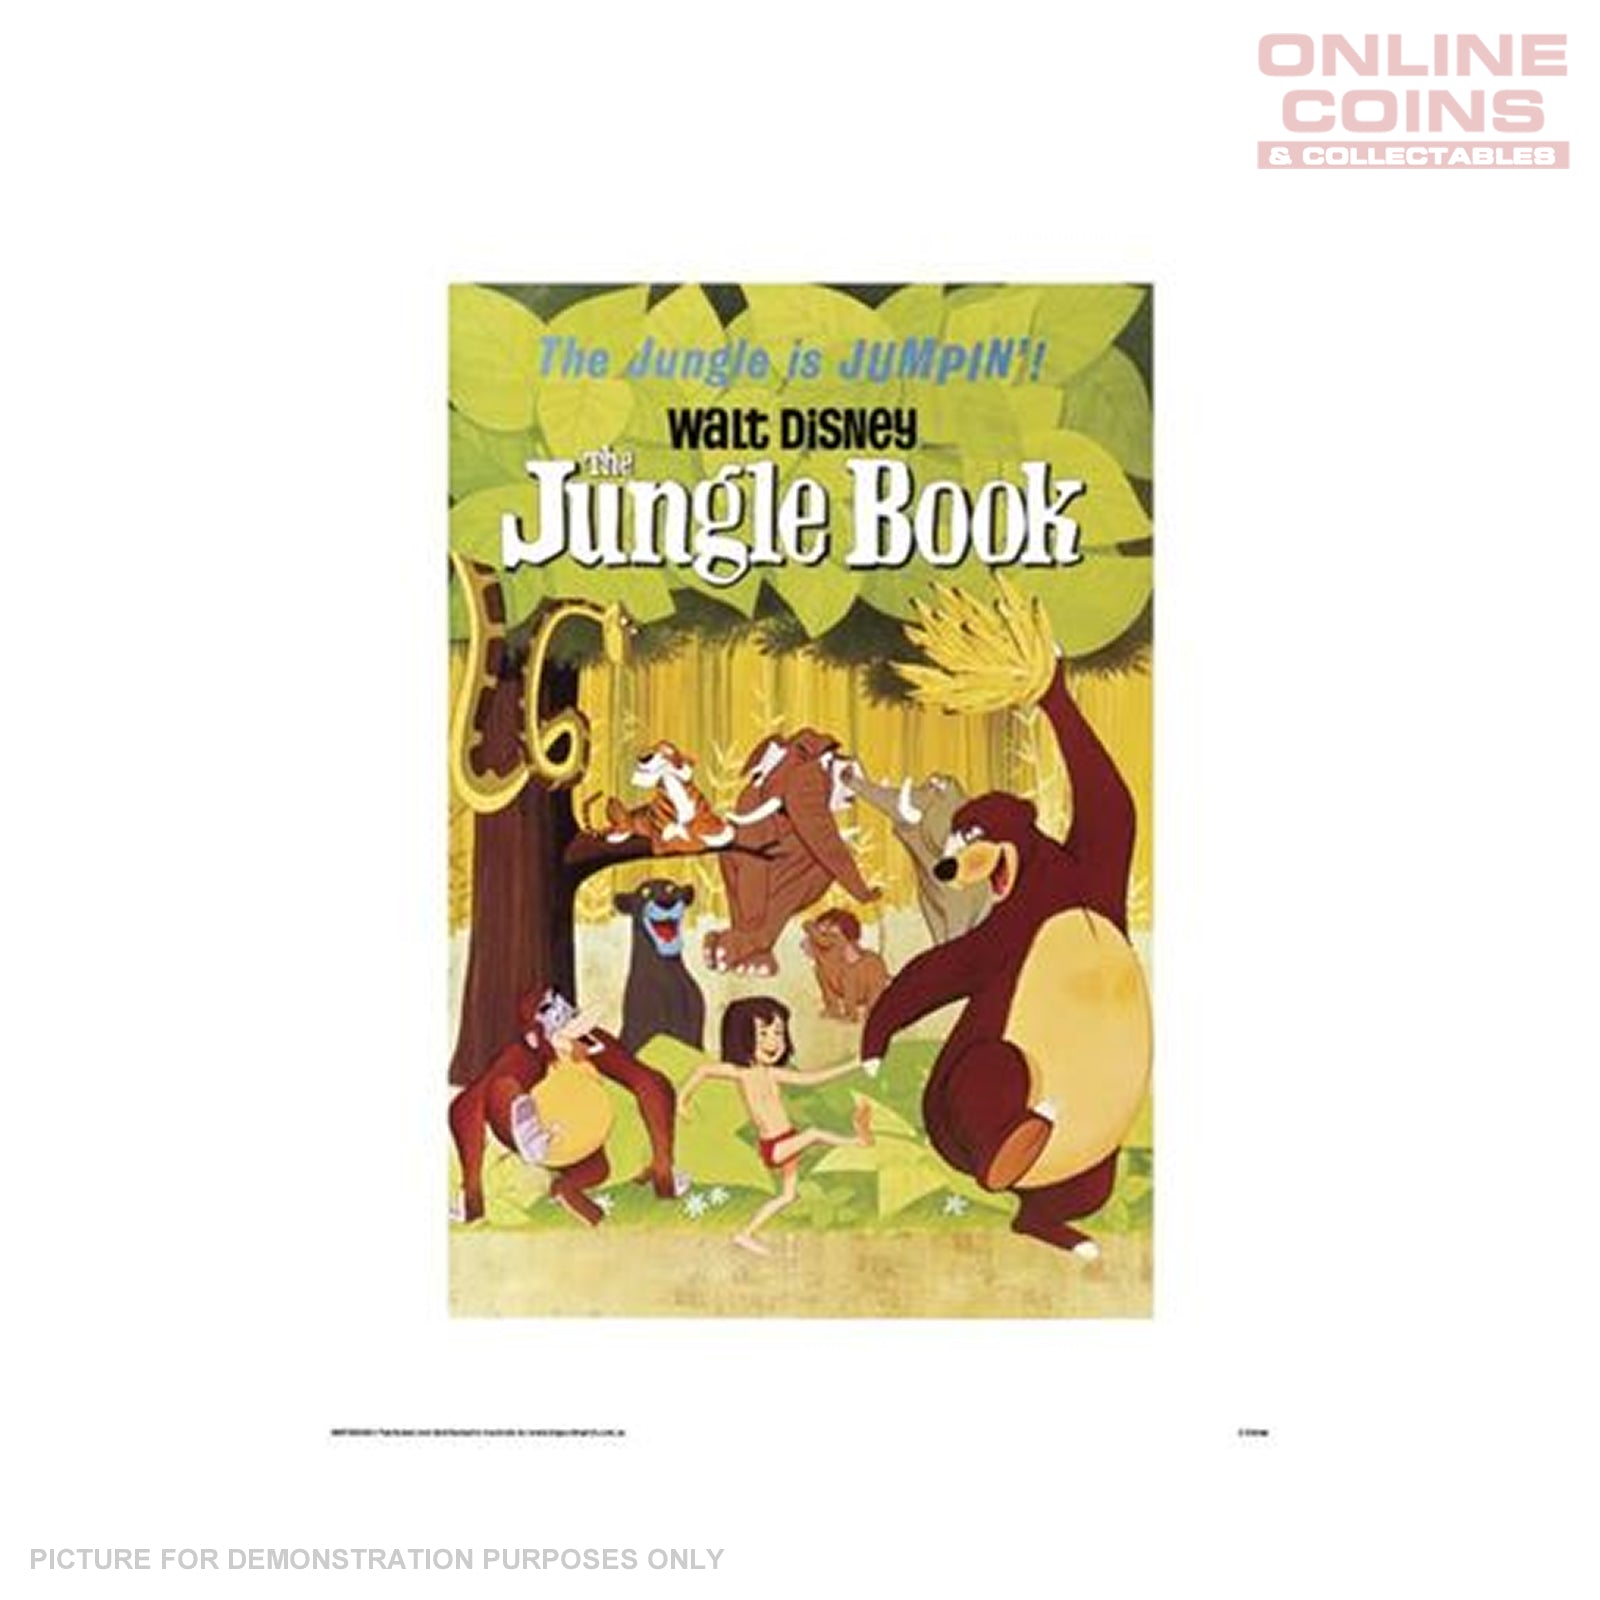 Disney Officially Licensed Art Print - Jungle Book Movie Poster